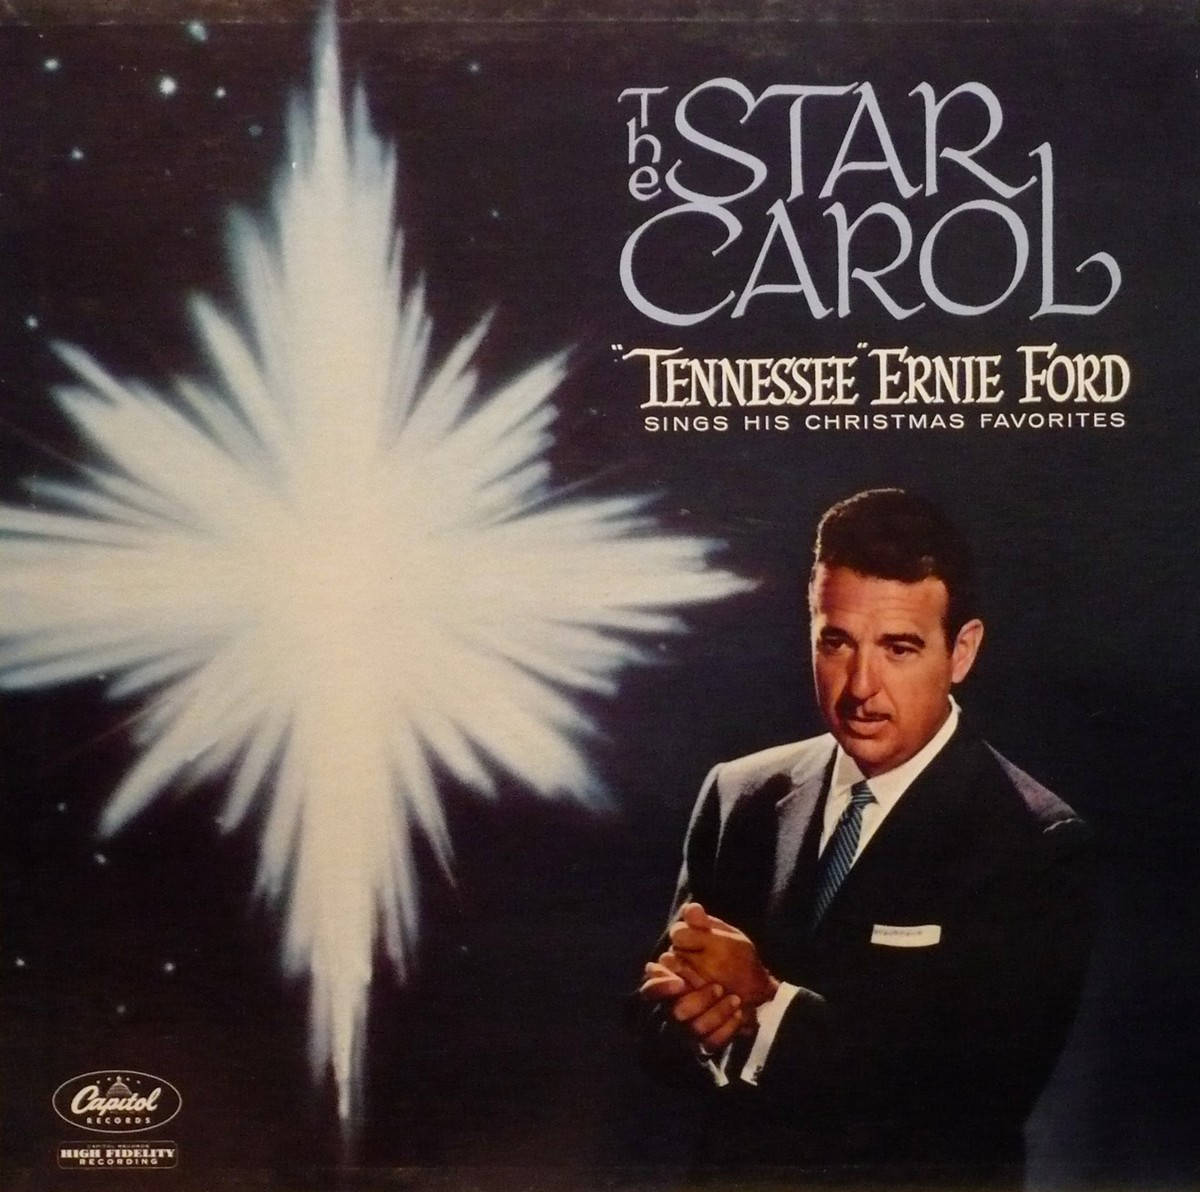 Tennessee Ernie Ford For The Star Carol Wallpaper